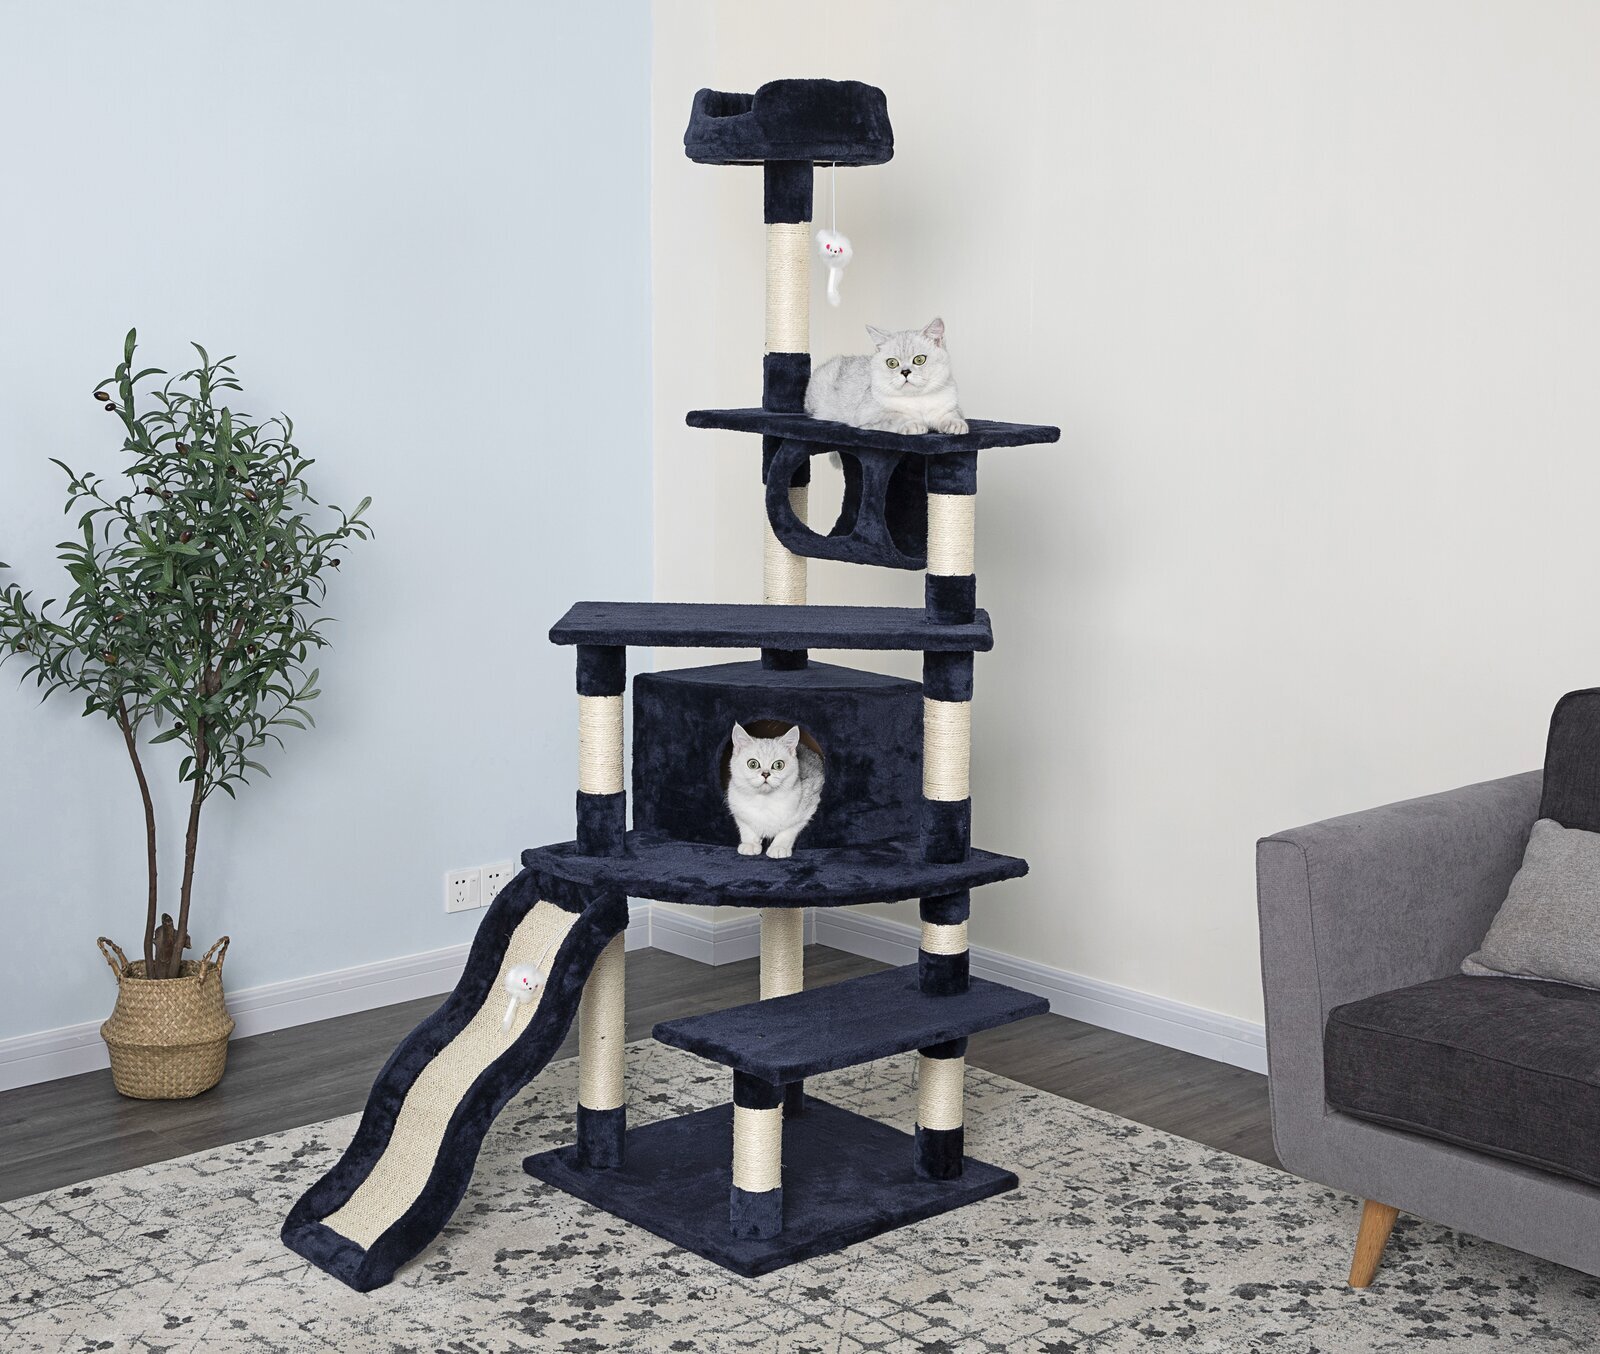 Huge cat trees with slide